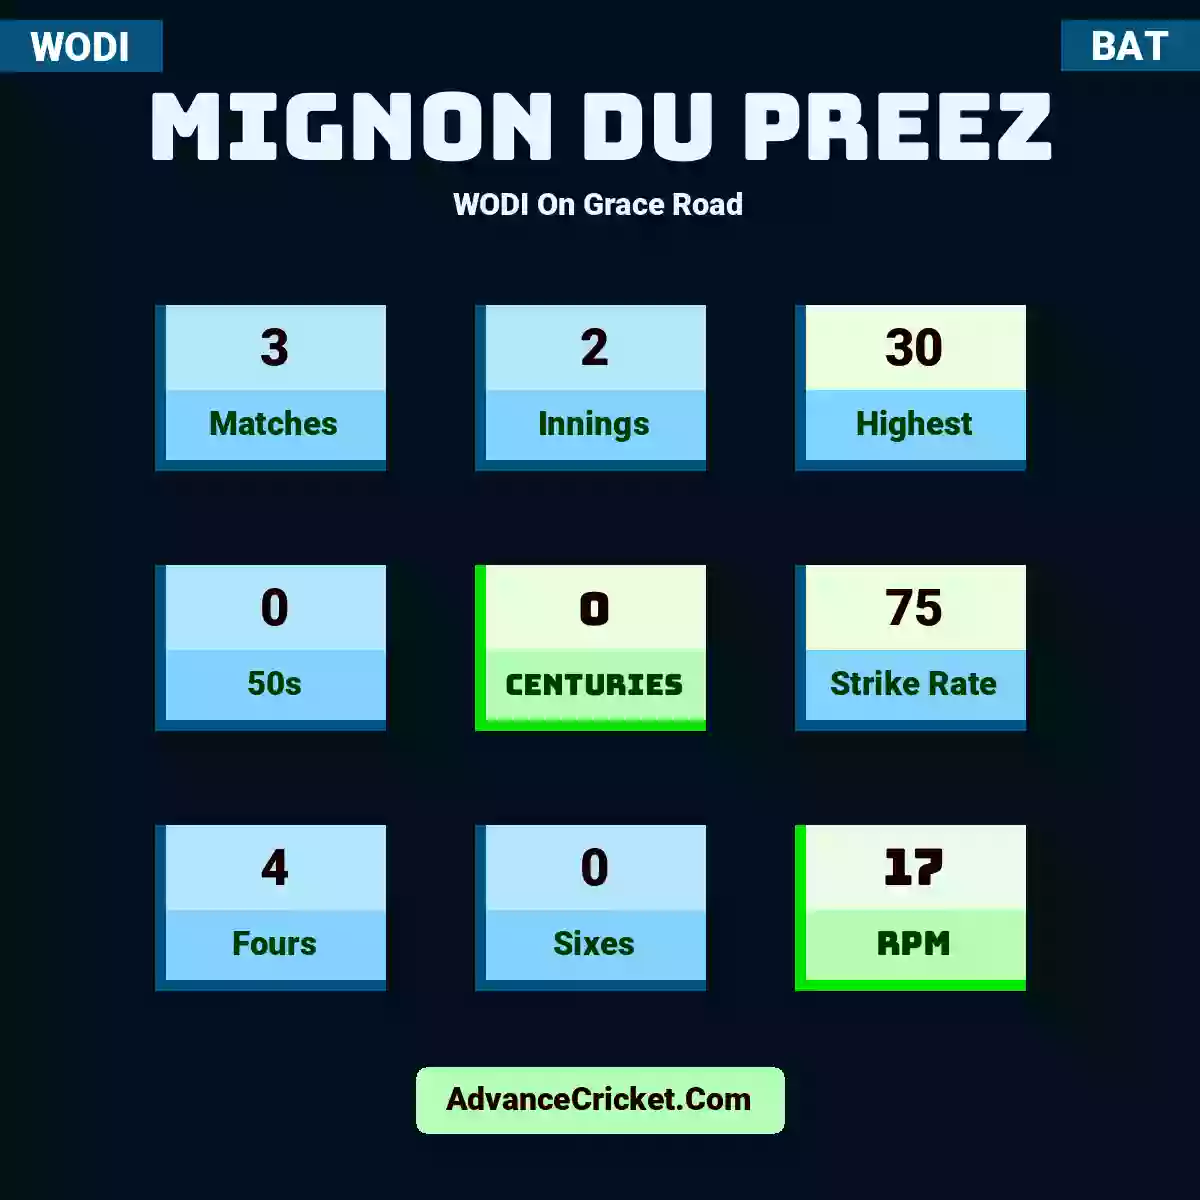 Mignon du Preez WODI  On Grace Road, Mignon du Preez played 3 matches, scored 30 runs as highest, 0 half-centuries, and 0 centuries, with a strike rate of 75. M.Preez hit 4 fours and 0 sixes, with an RPM of 17.